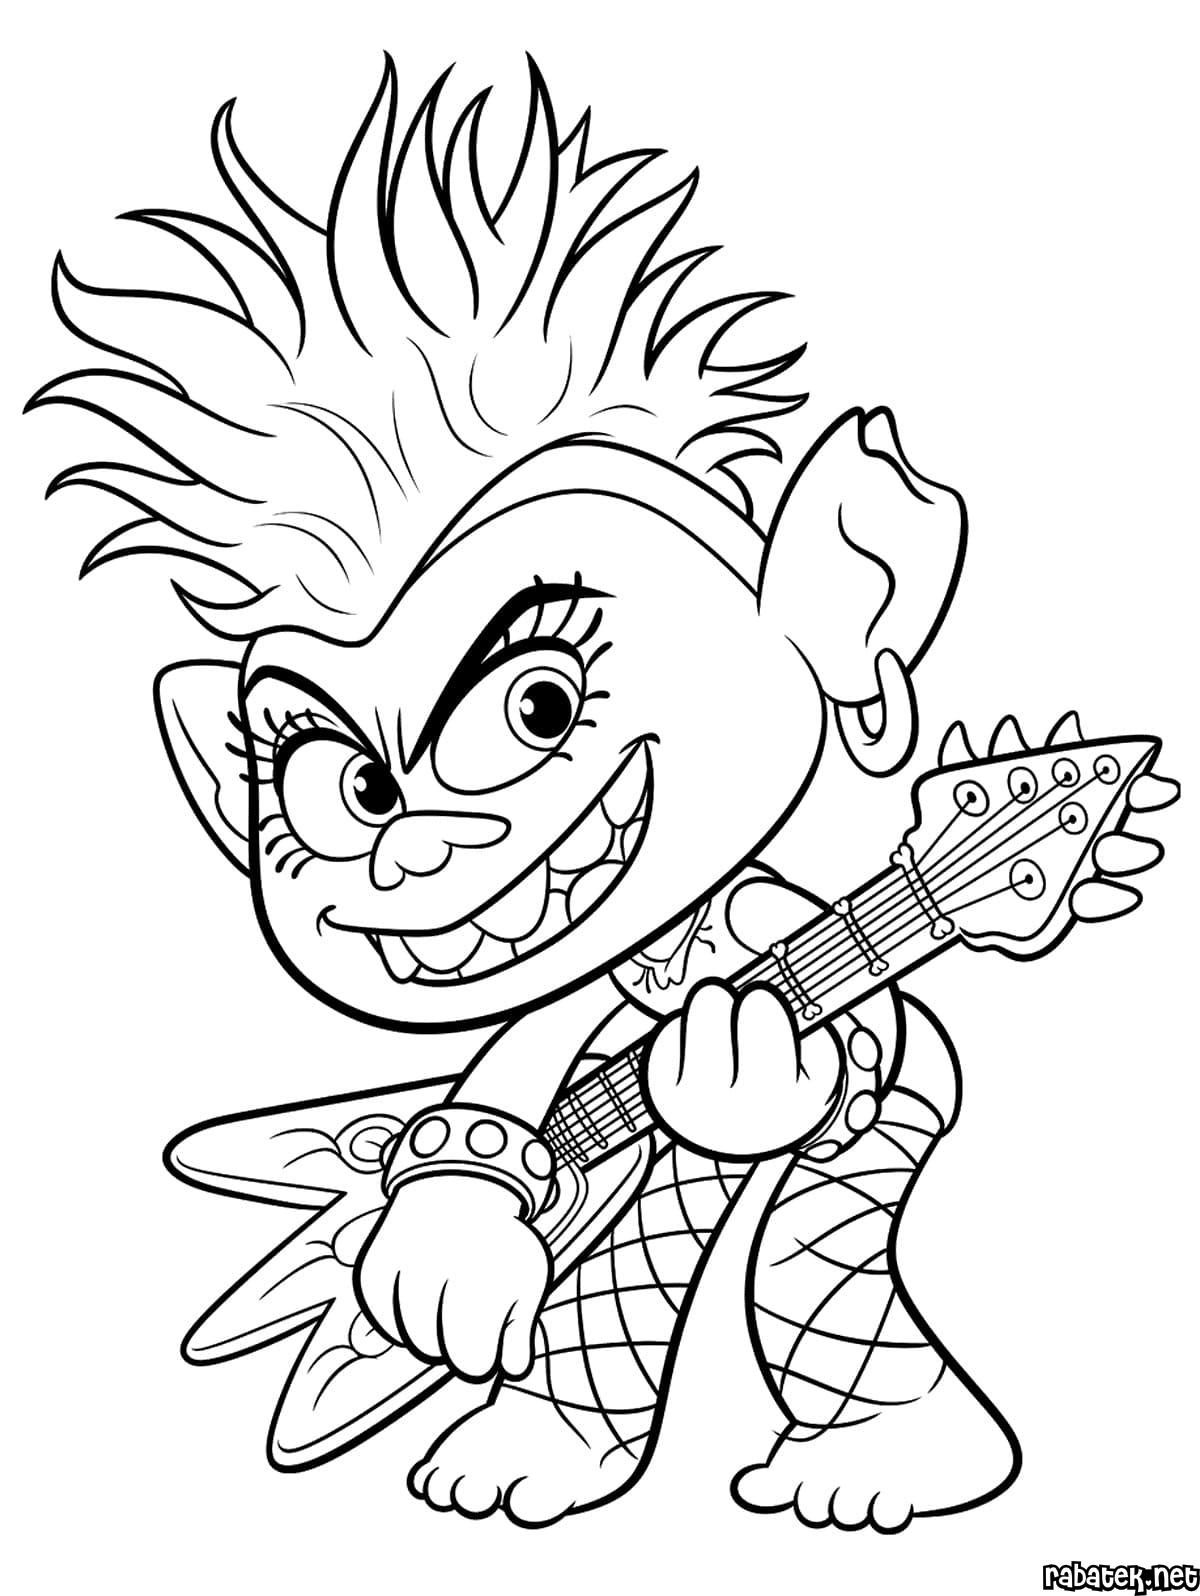 Trolls Coloring Pages Free Printable Coloring Book For Kids